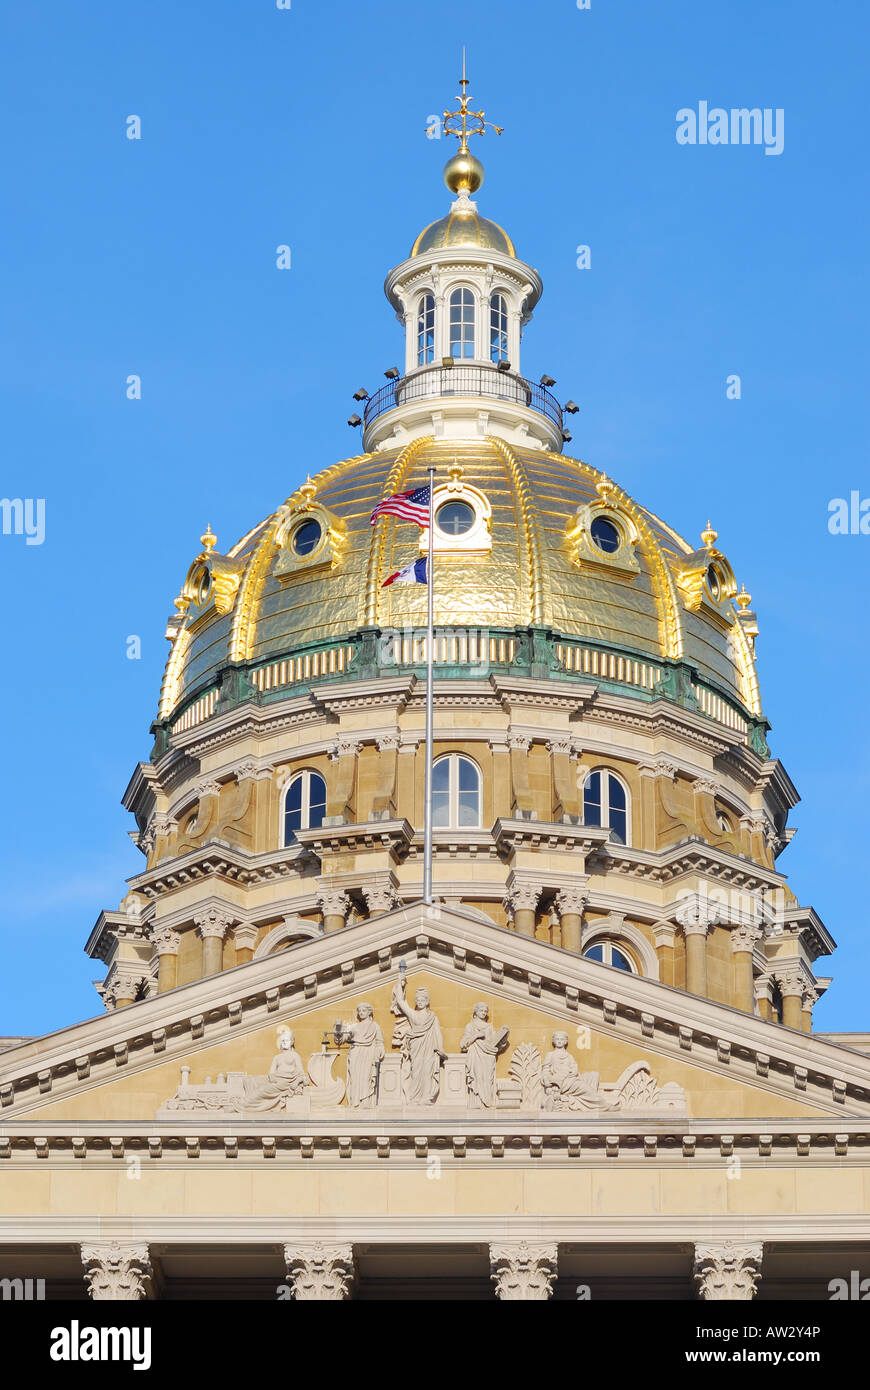 Detail of Iowa State Capitol golden dome Stock Photo